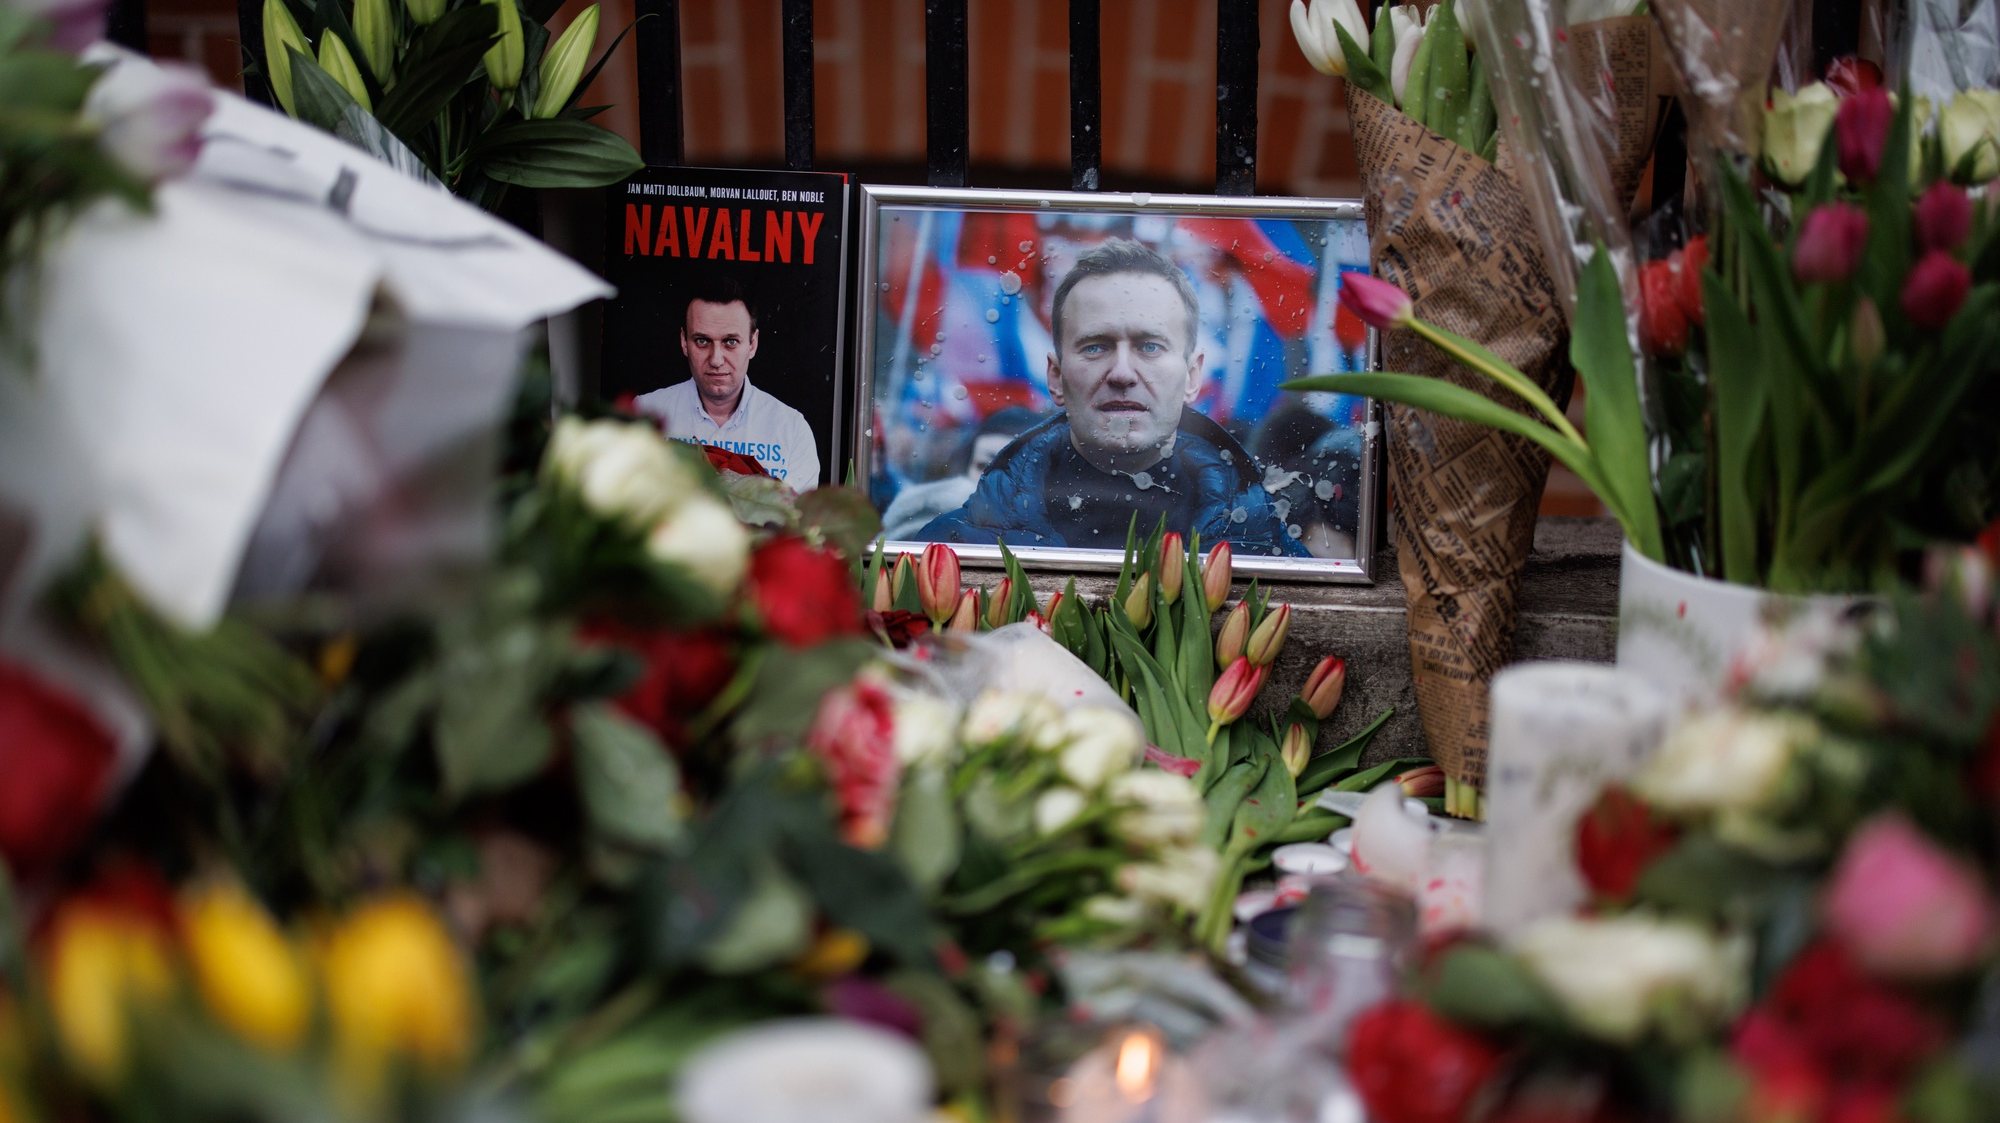 epa11161220 Floral tributes left for the late Russian opposition leader Alexei Navalny outside the Russian Embassy in London, Britain, 17 February 2024. Russian opposition leader and outspoken Kremlin critic Alexei Navalny has died aged 47 in a penal colony, the Federal Penitentiary Service of the Yamalo-Nenets Autonomous District announced on 16 February 2024. In late 2023 Navalny was transferred to an Arctic penal colony considered one of the harshest prisons.  EPA/TOLGA AKMEN